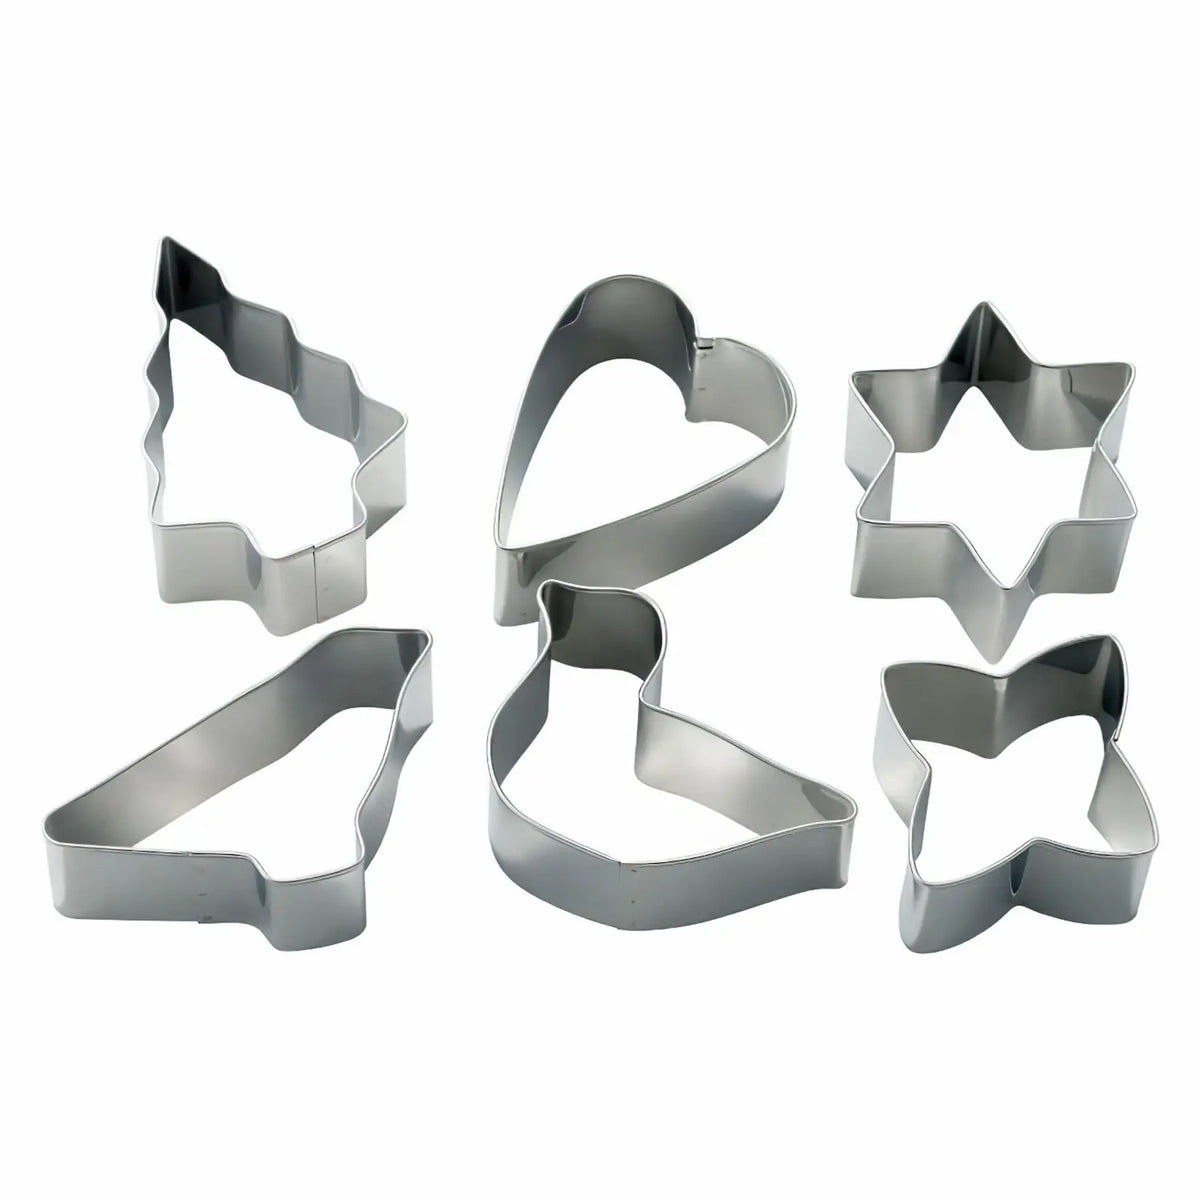 SHIMOTORI Stainless Steel Cookie Cutter 6 pcs Set A